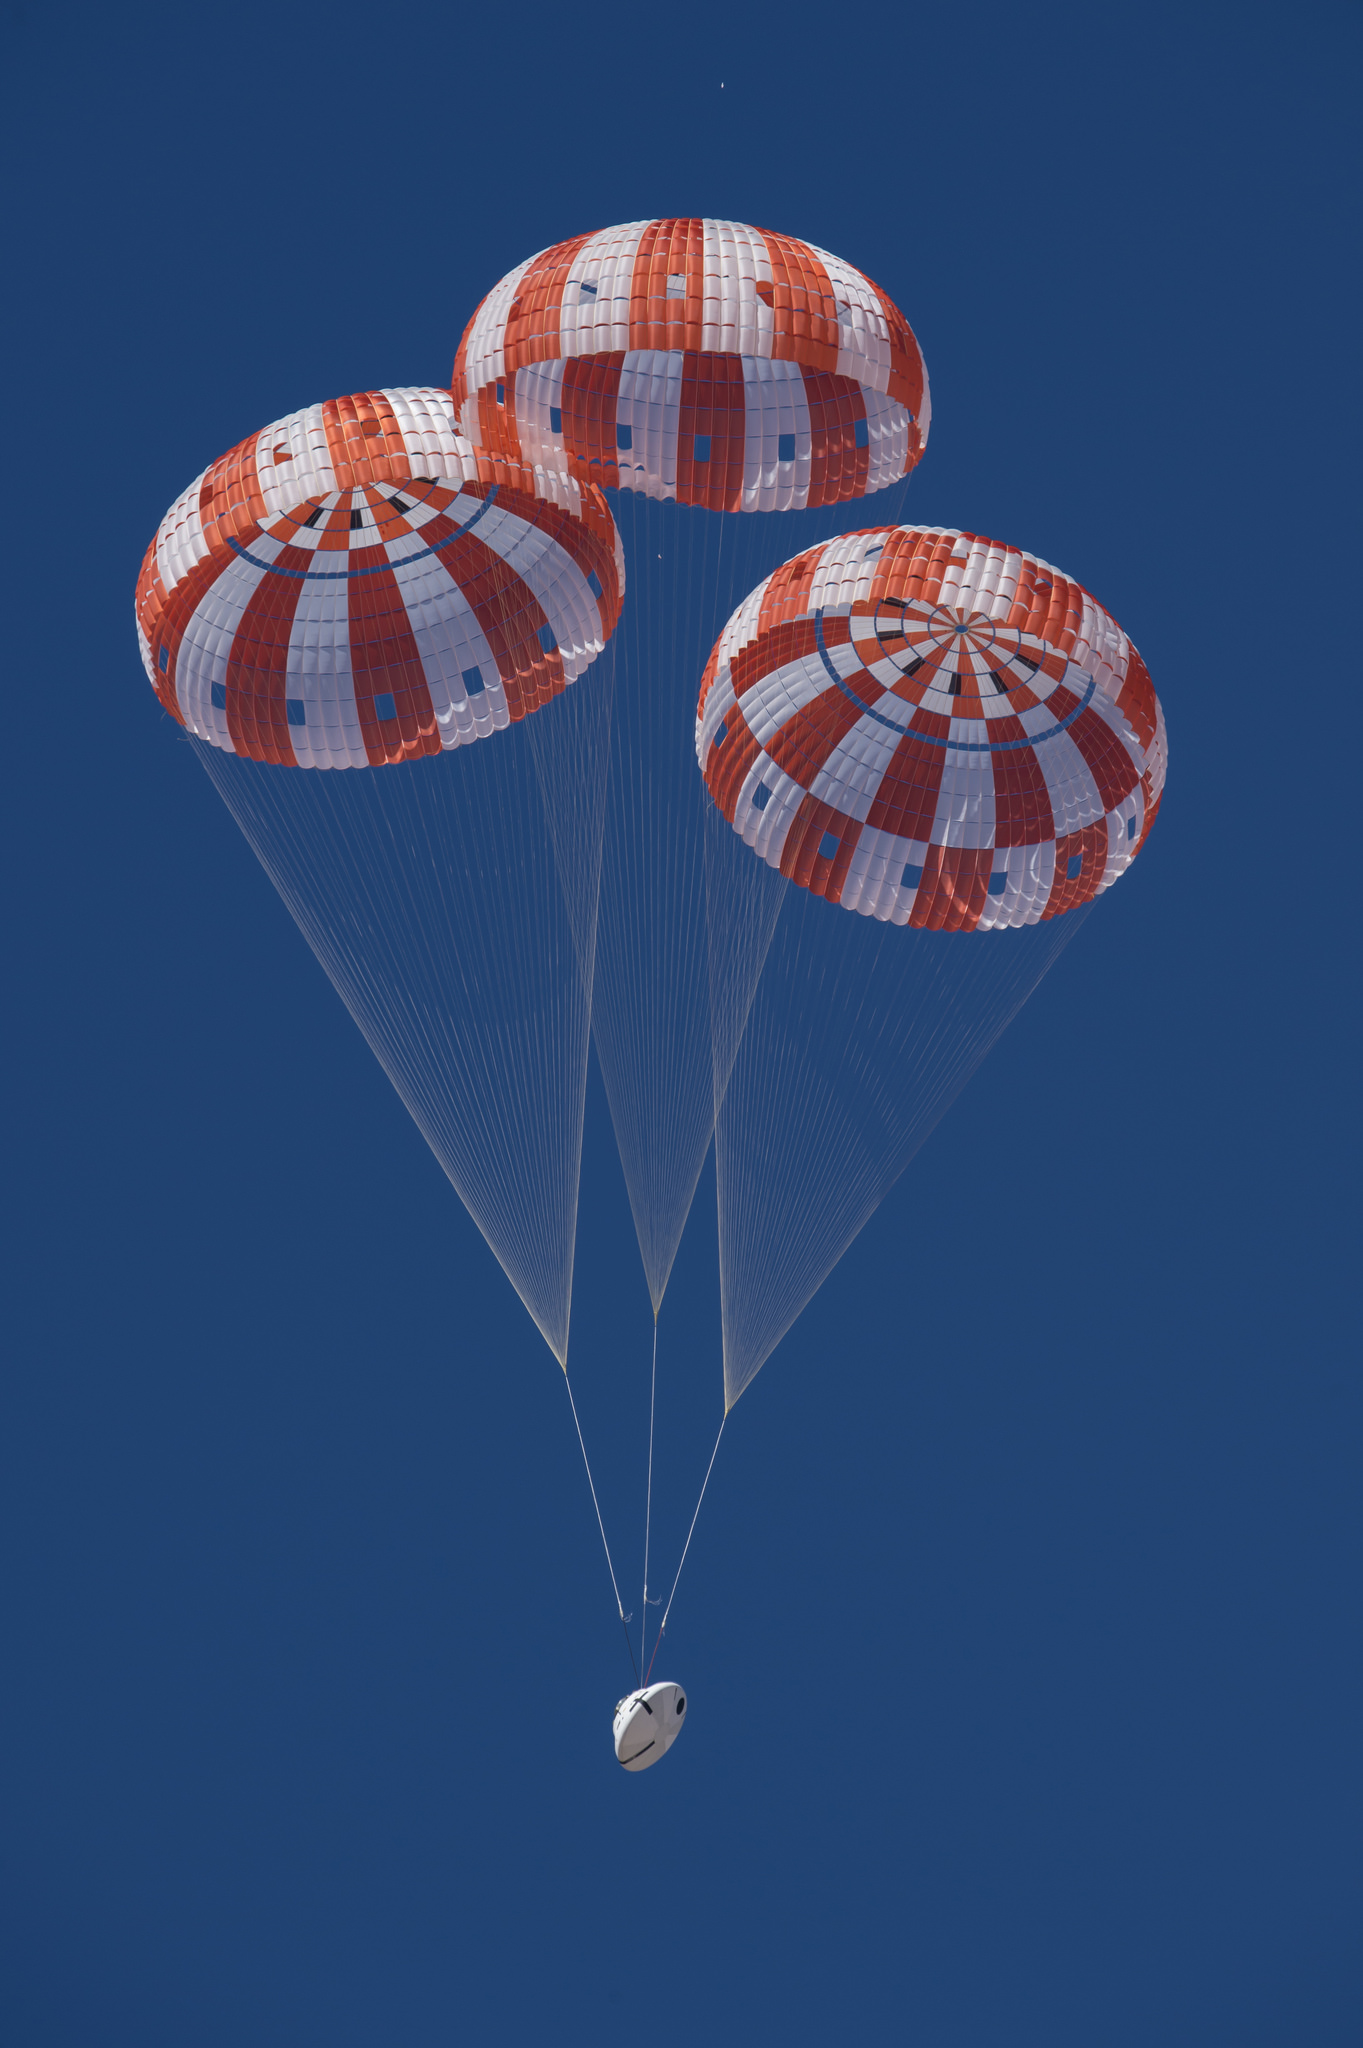 NASA is qualifying Orion’s parachutes for missions with astronauts.